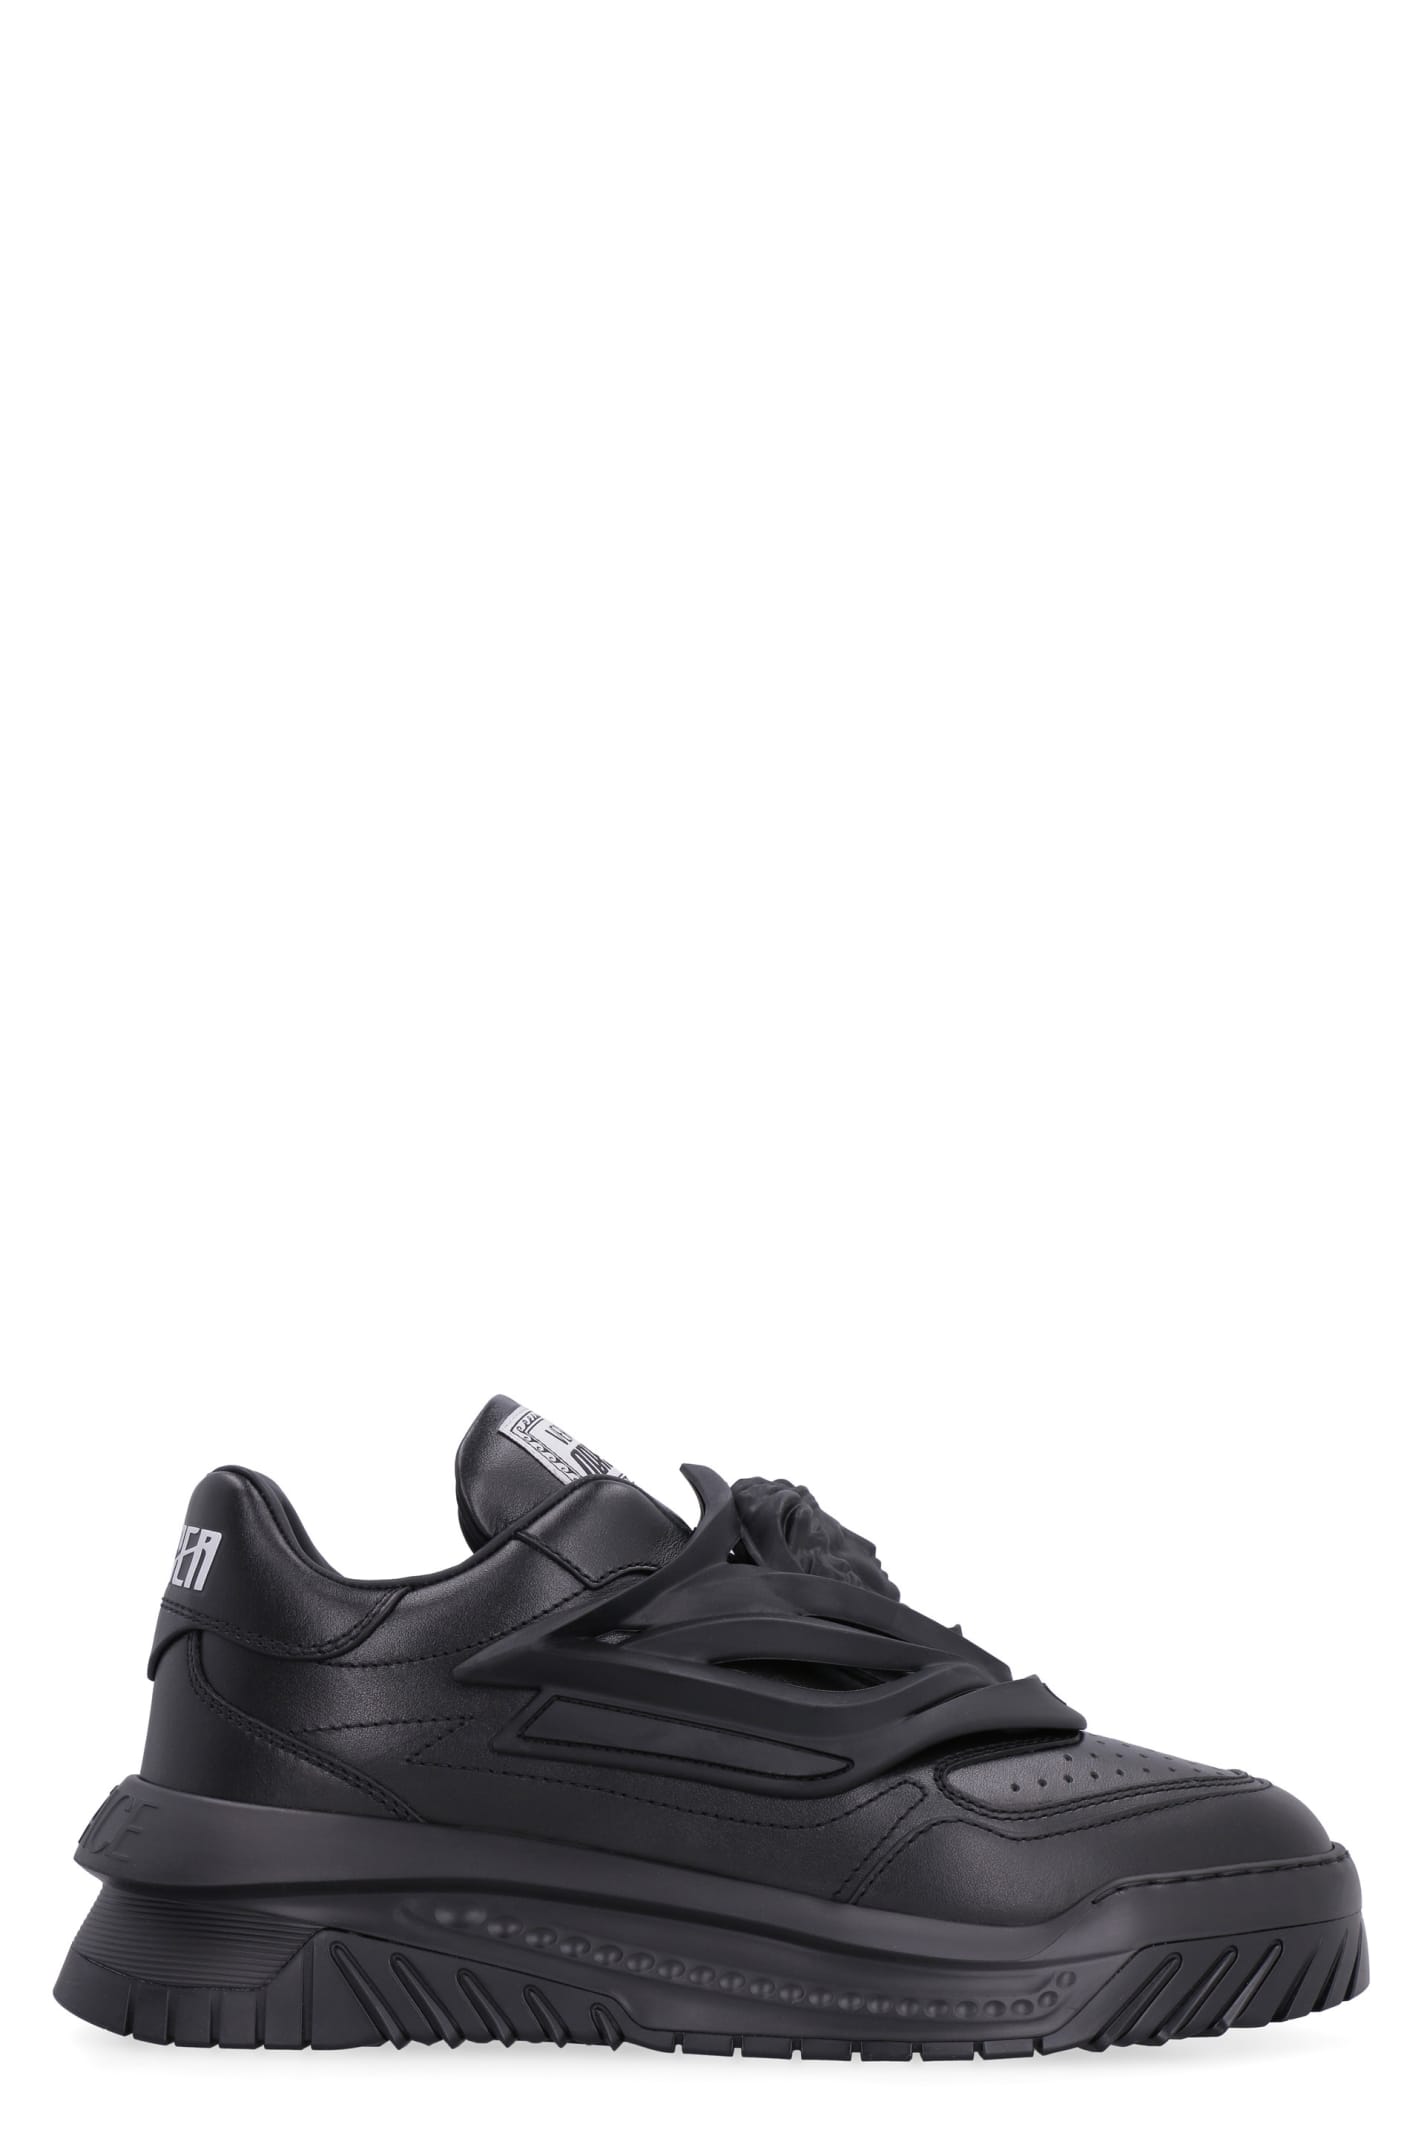 Versace Odissea Leather Sneakers